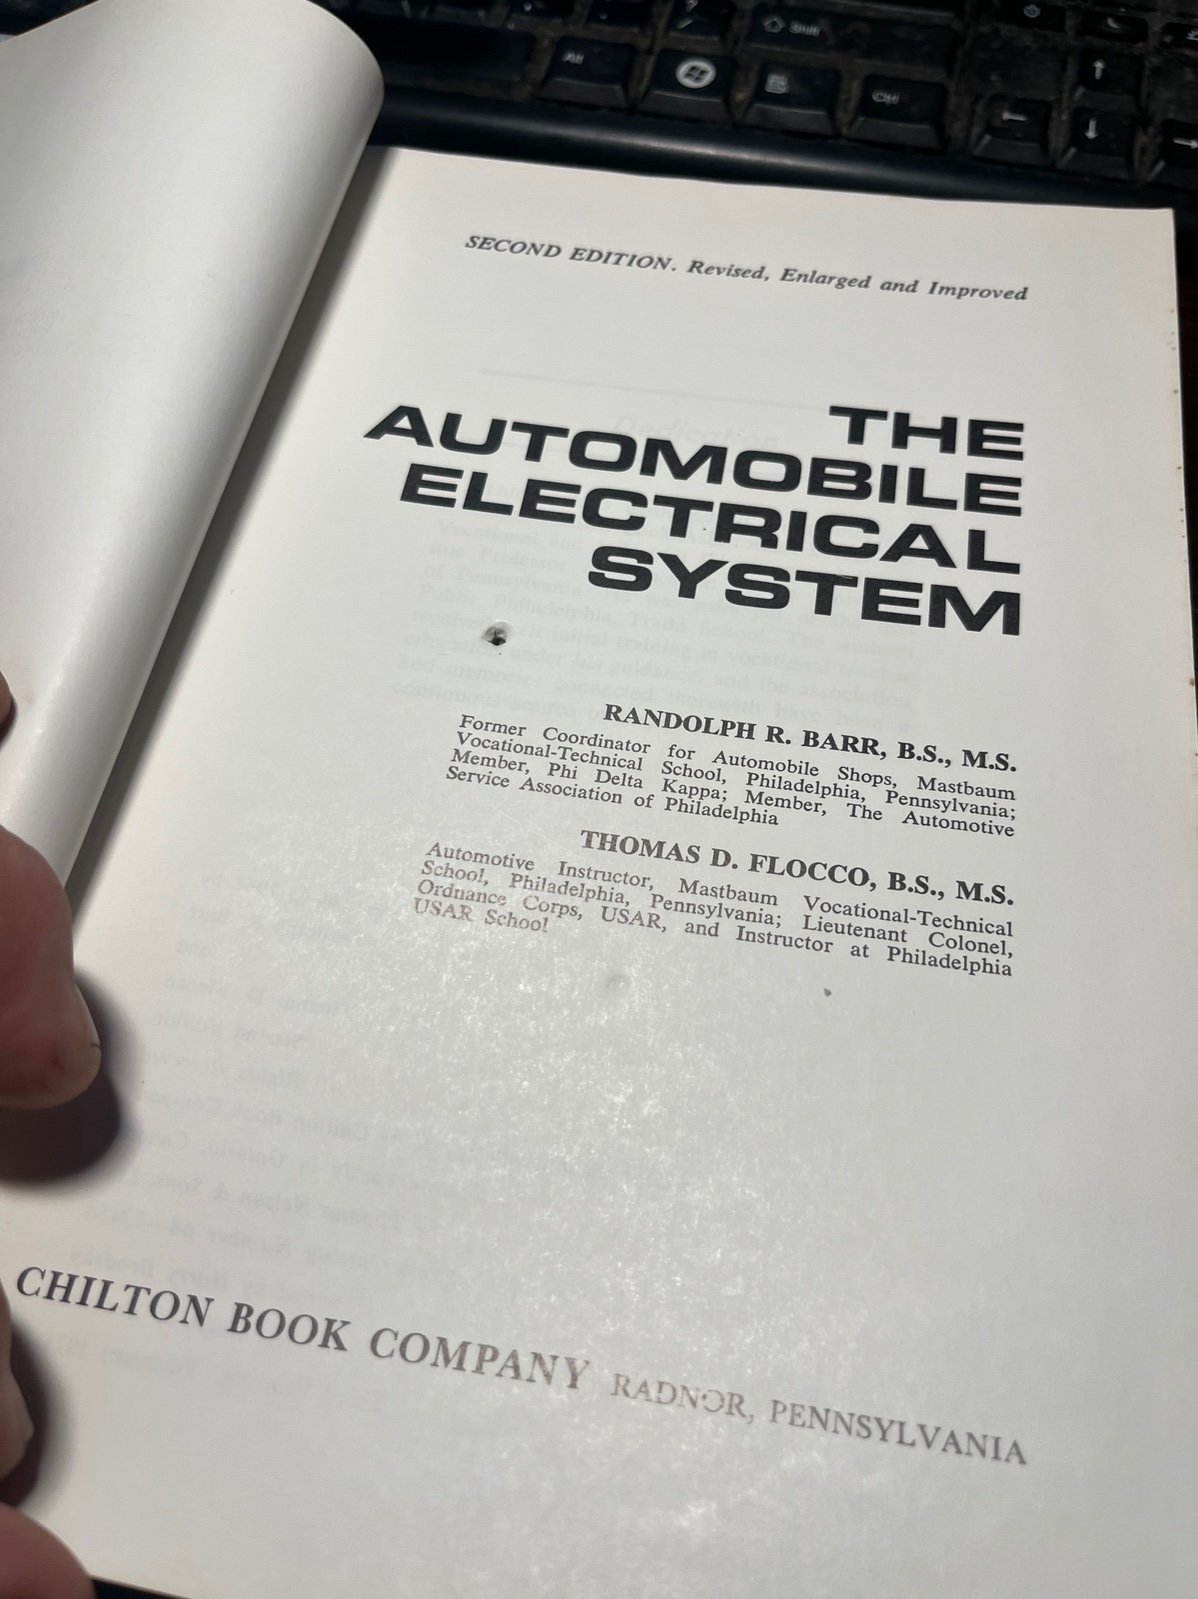 The Automobile electrical system book 2nd edition 1974 ARoHVOLdZ